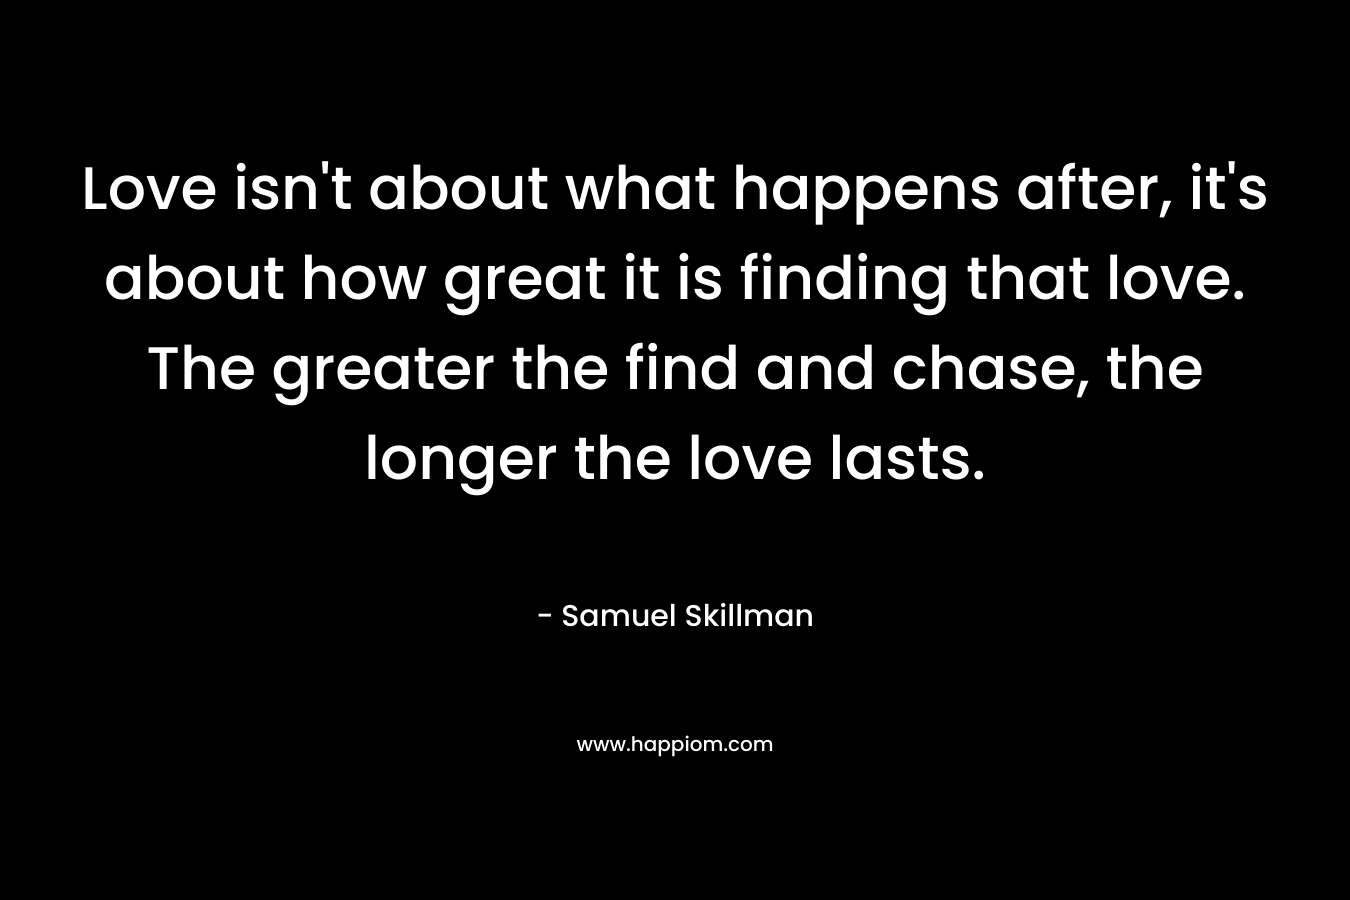 Love isn’t about what happens after, it’s about how great it is finding that love. The greater the find and chase, the longer the love lasts. – Samuel Skillman